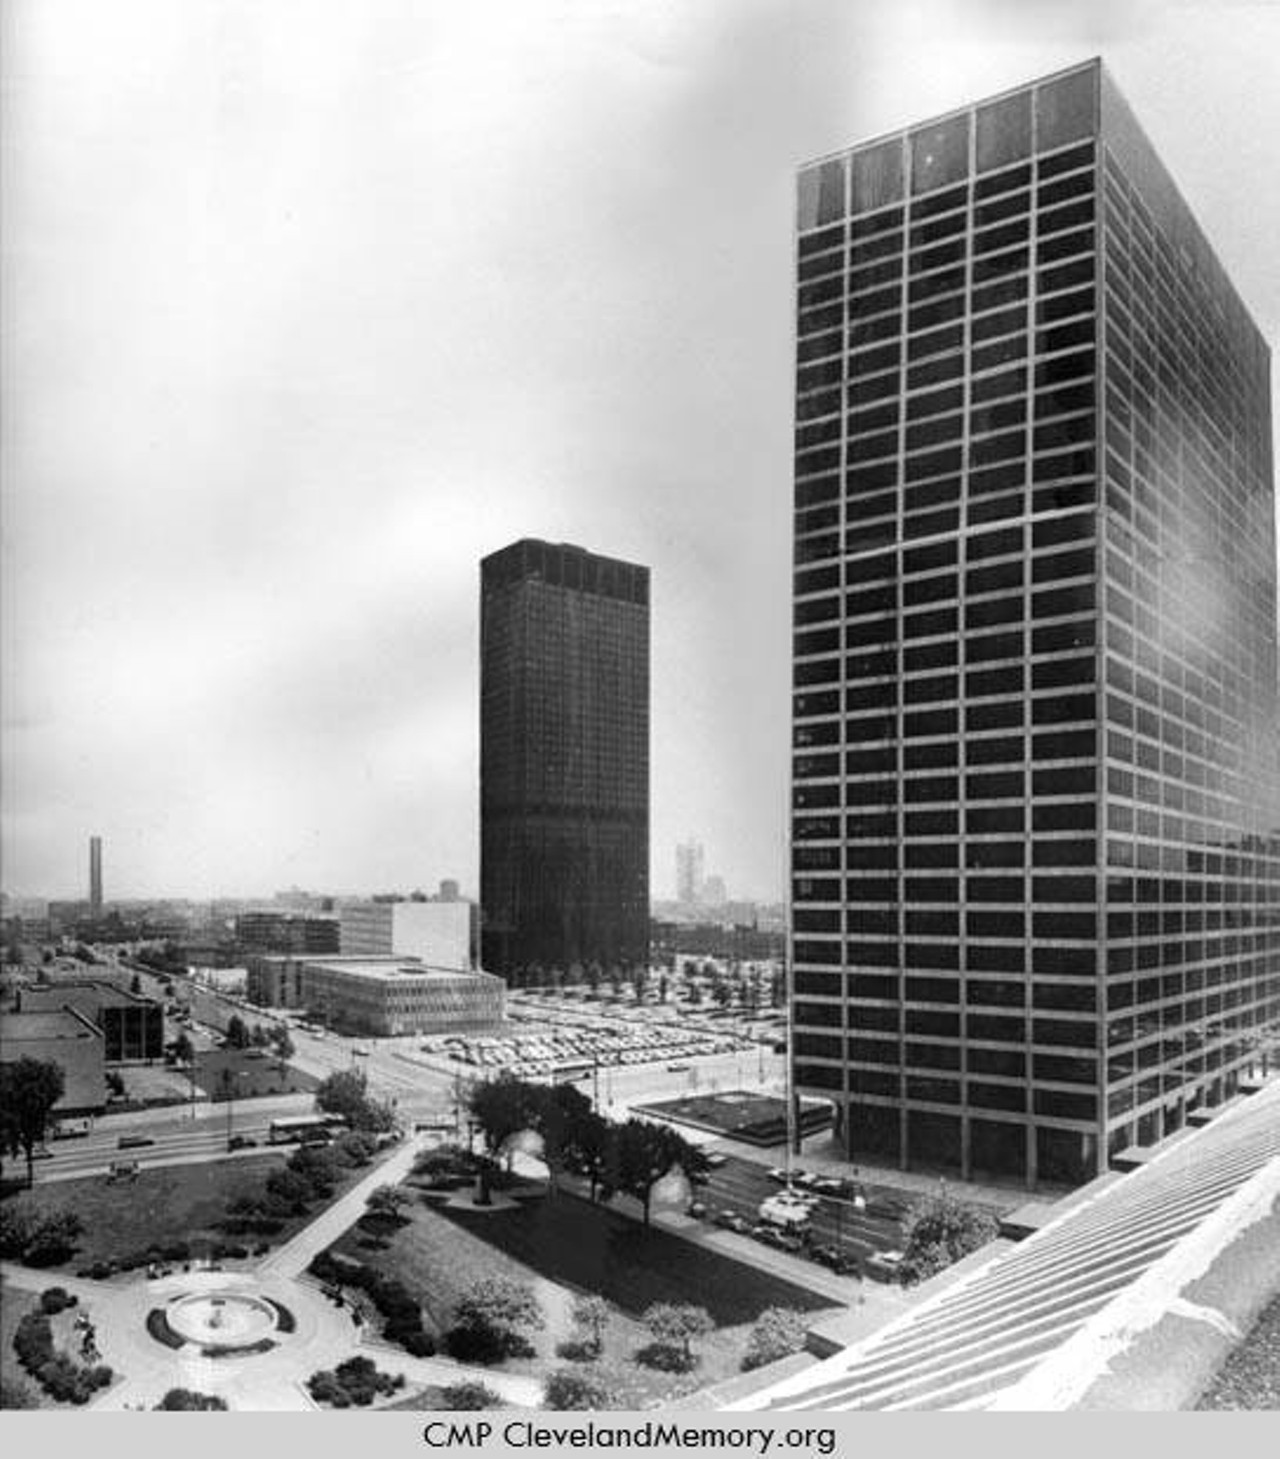 Erieview Plaza and surrounding building, 1971